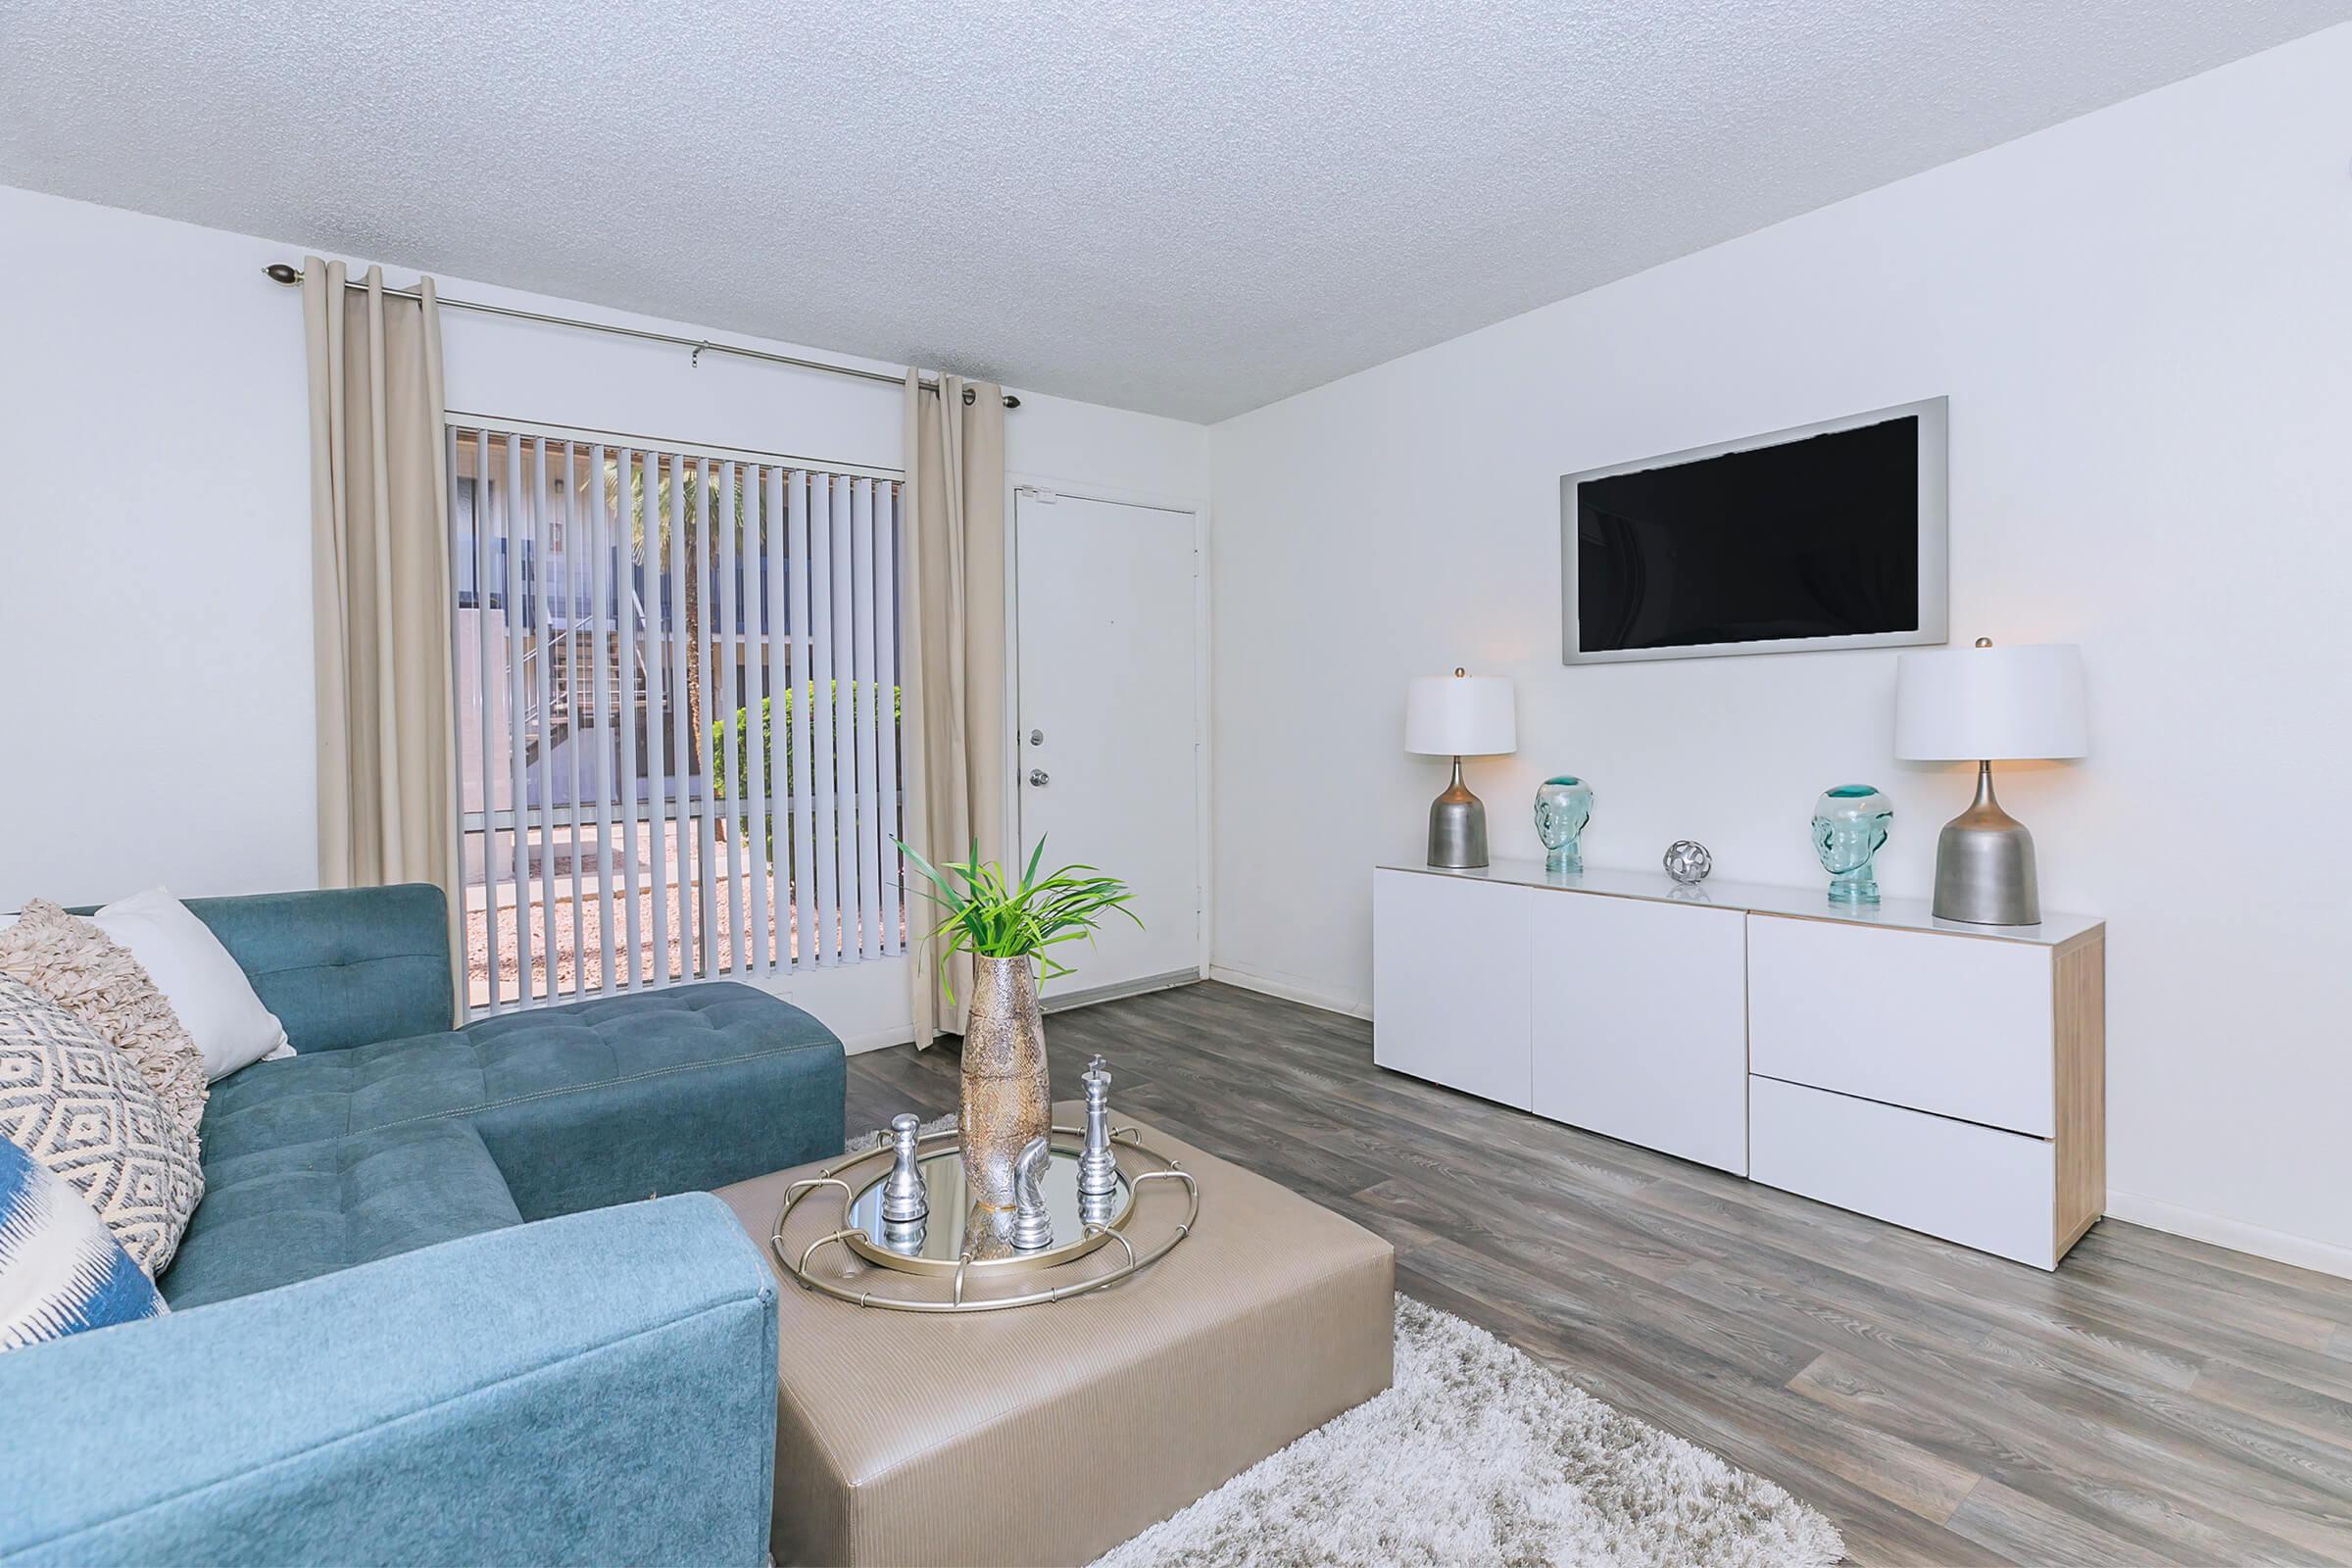 An apartment with a blue couch, wood-style floors, and sliding doors to a patio at Rise North Ridge.